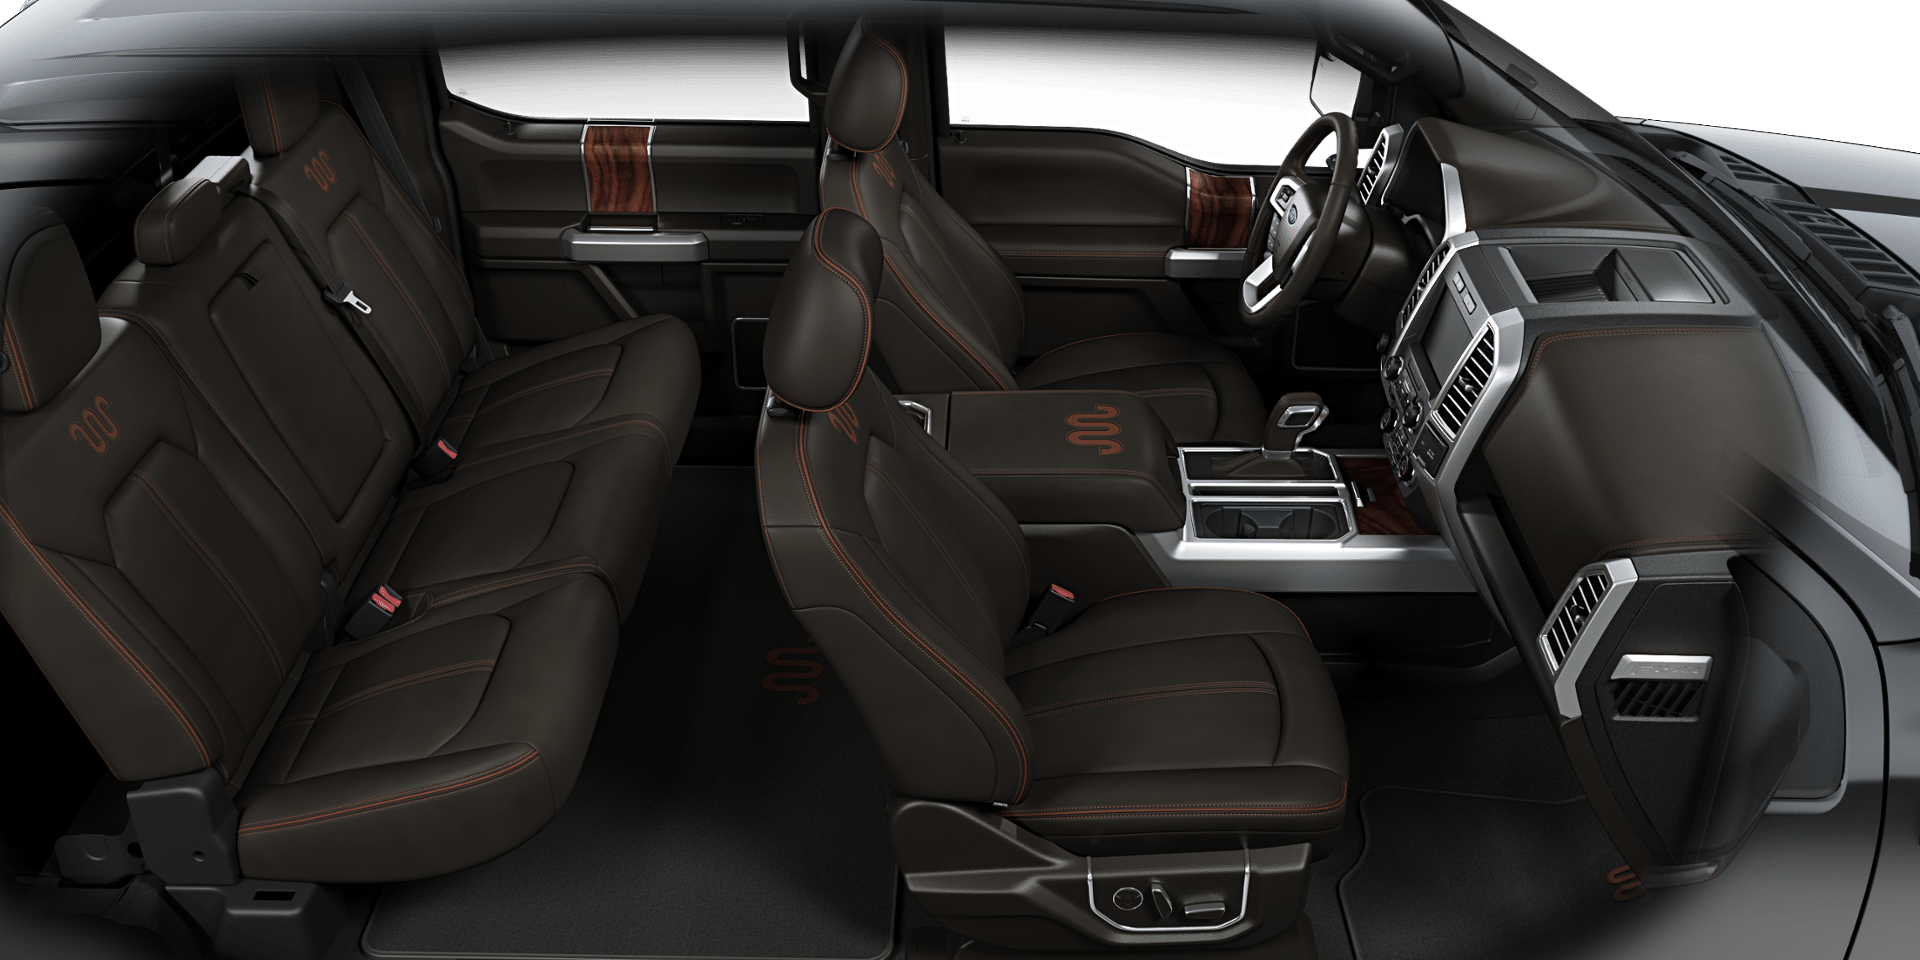 Vehicle - 2018 Ford F 150 Lariat Special Edition Interior (1920x960), Png Download